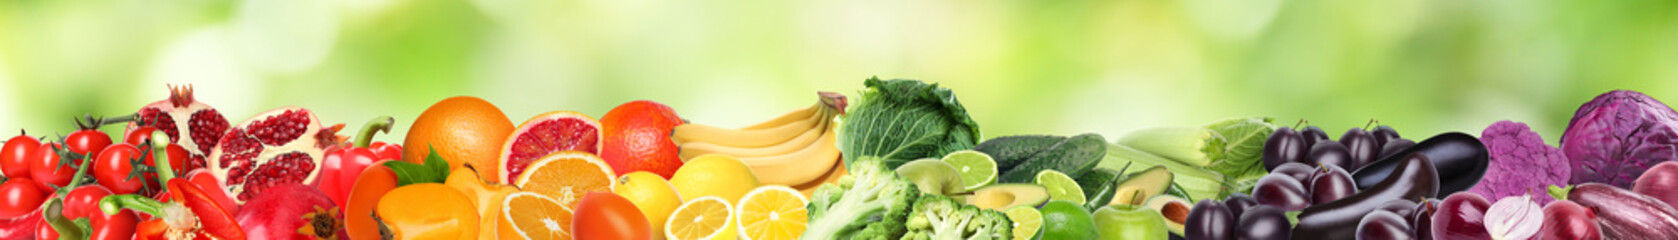 Many different fresh fruits and vegetables against blurred green background. Banner design